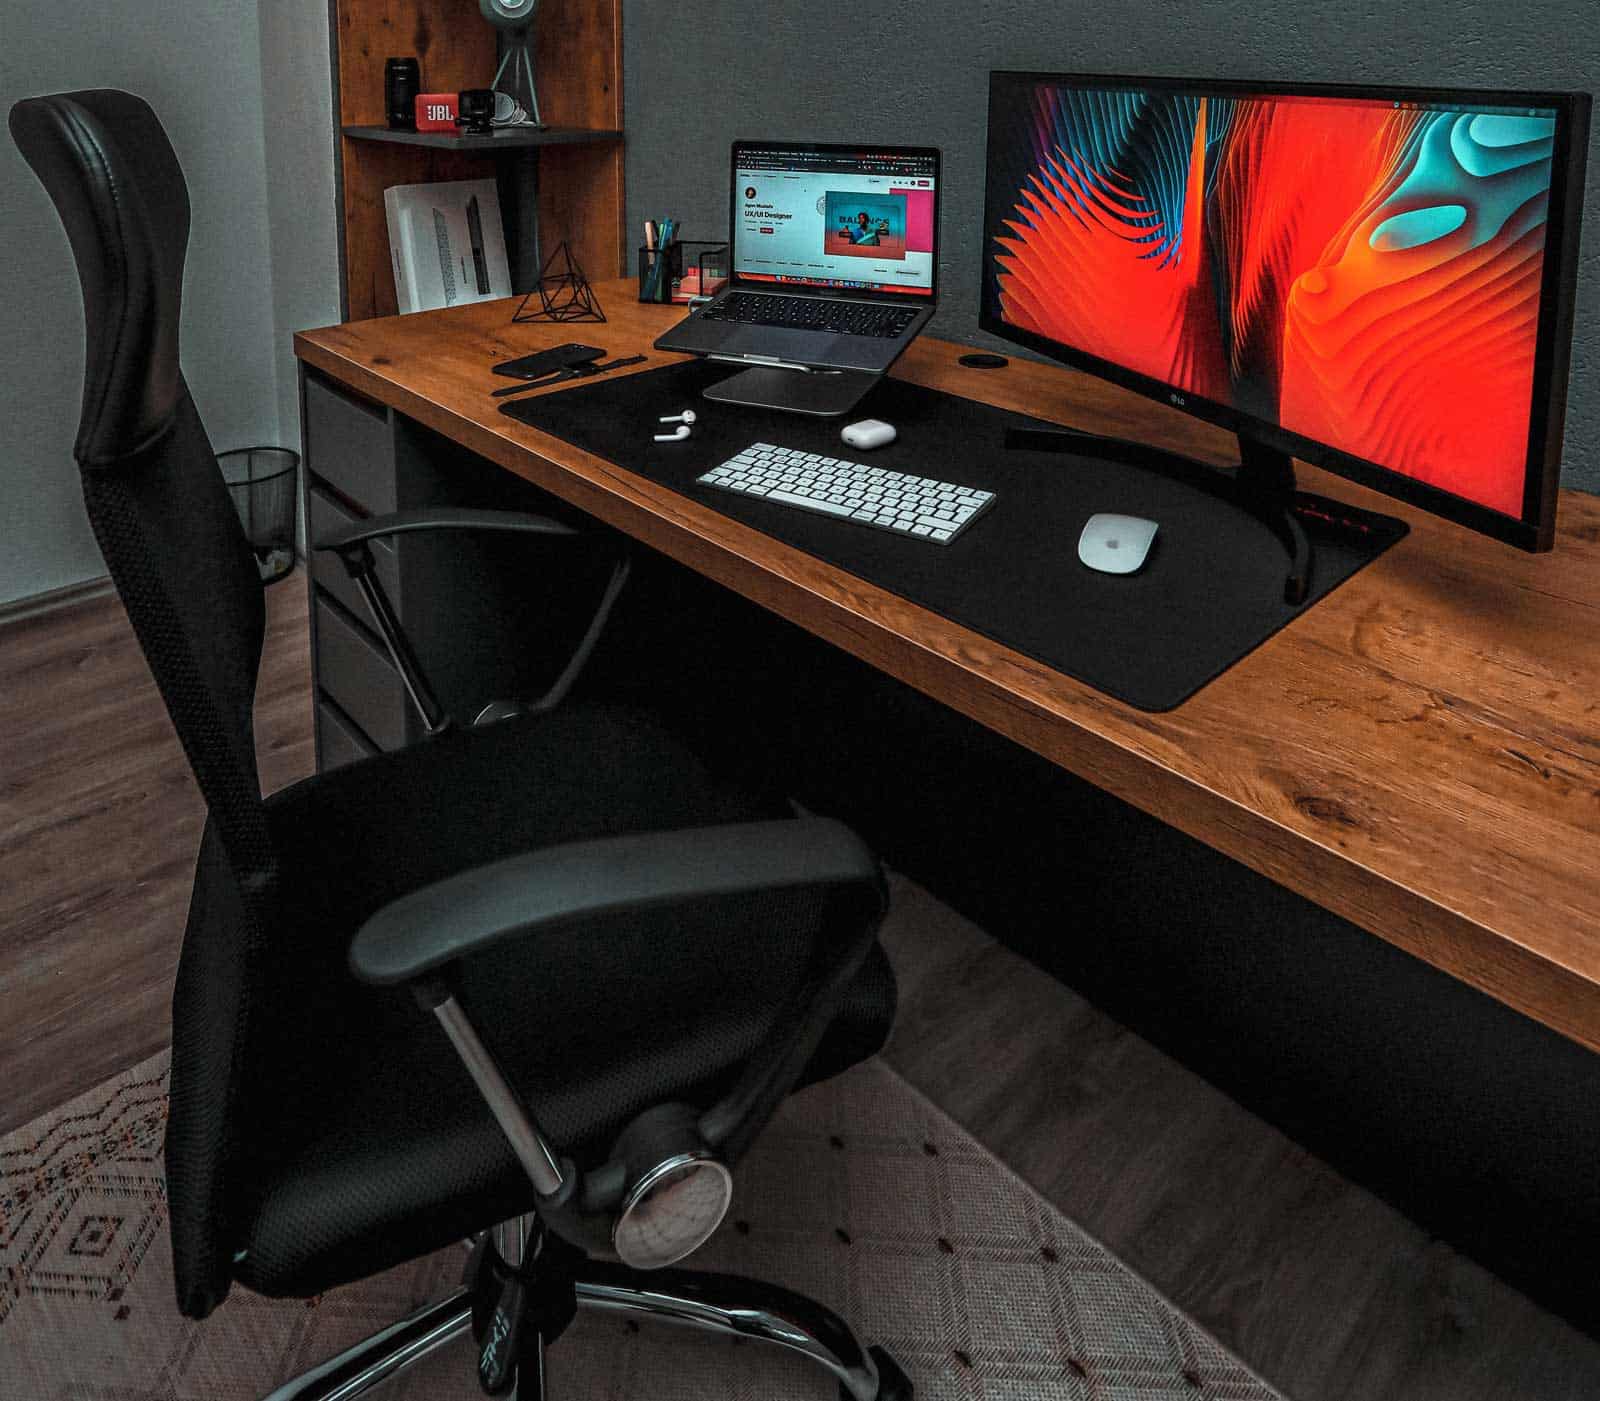 Related Questions: What Is A Good Amount To Spend On A Desk?